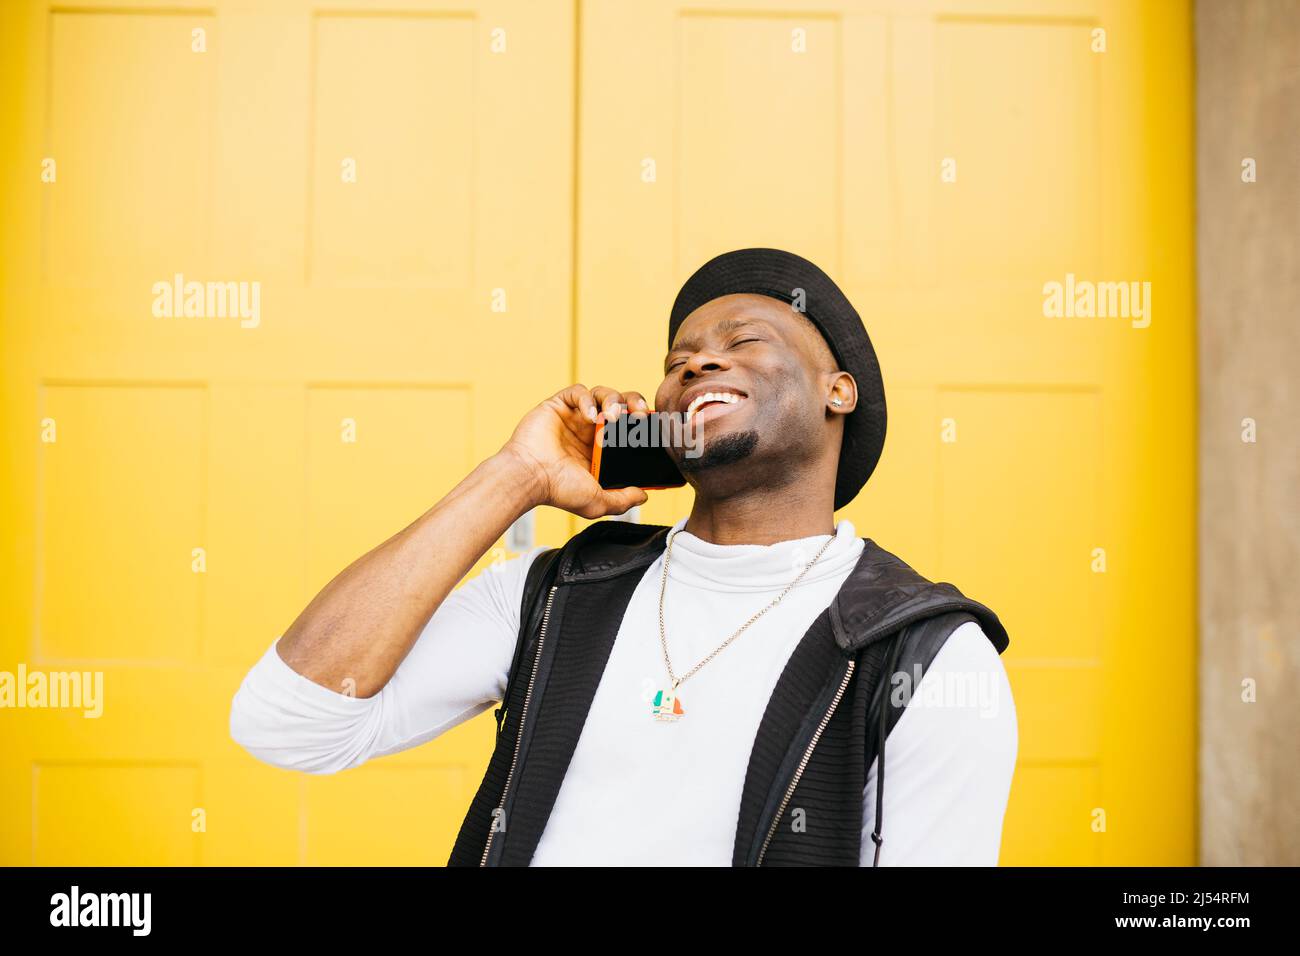 Portrait of a young smiling black male talking on a phone against a yellow door Stock Photo